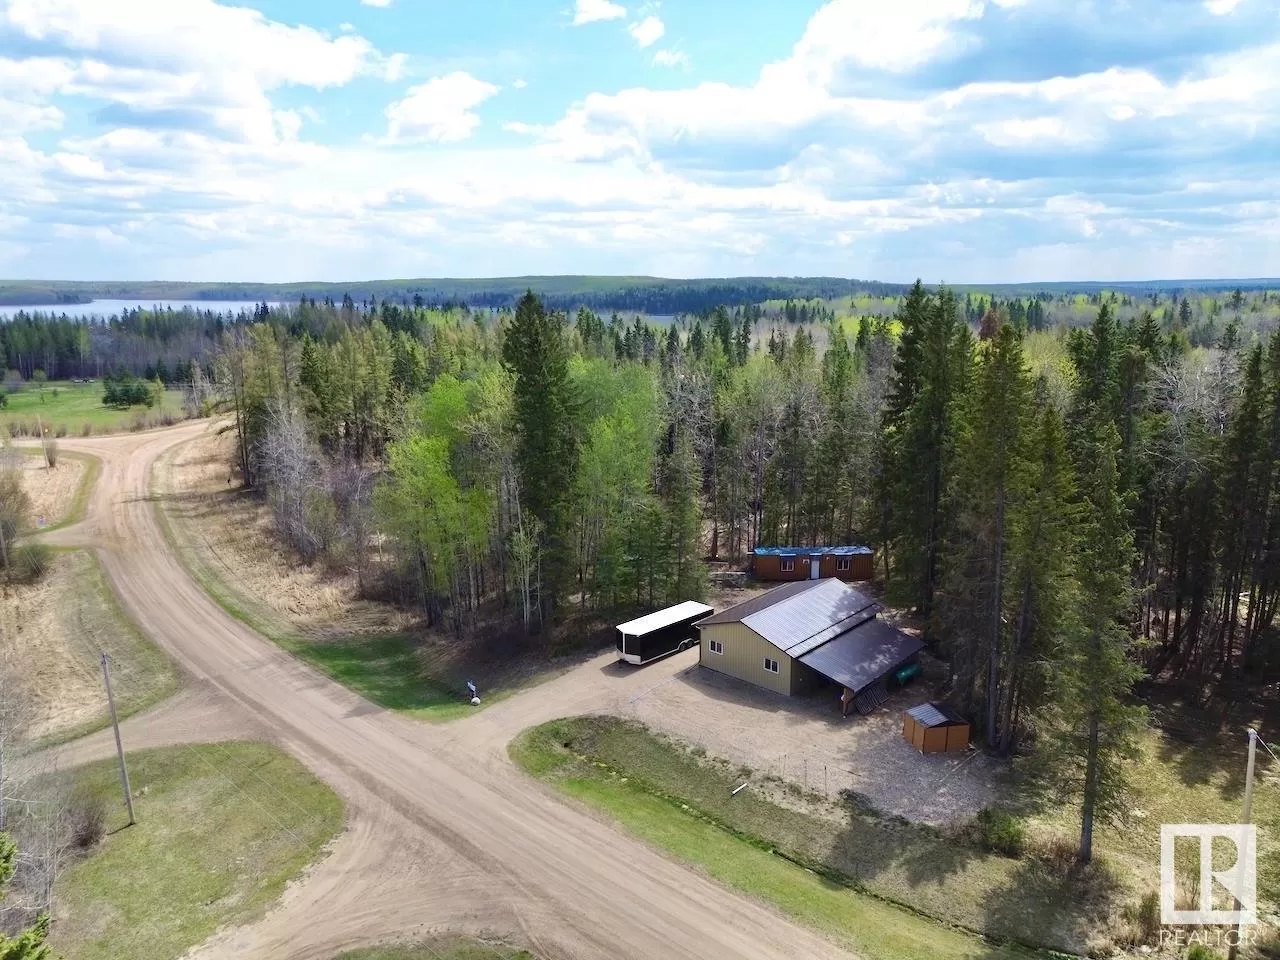 No Building for rent: #22 Paradise Valley Drive Skeleton Lake, Rural Athabasca County, Alberta T0A 0M0